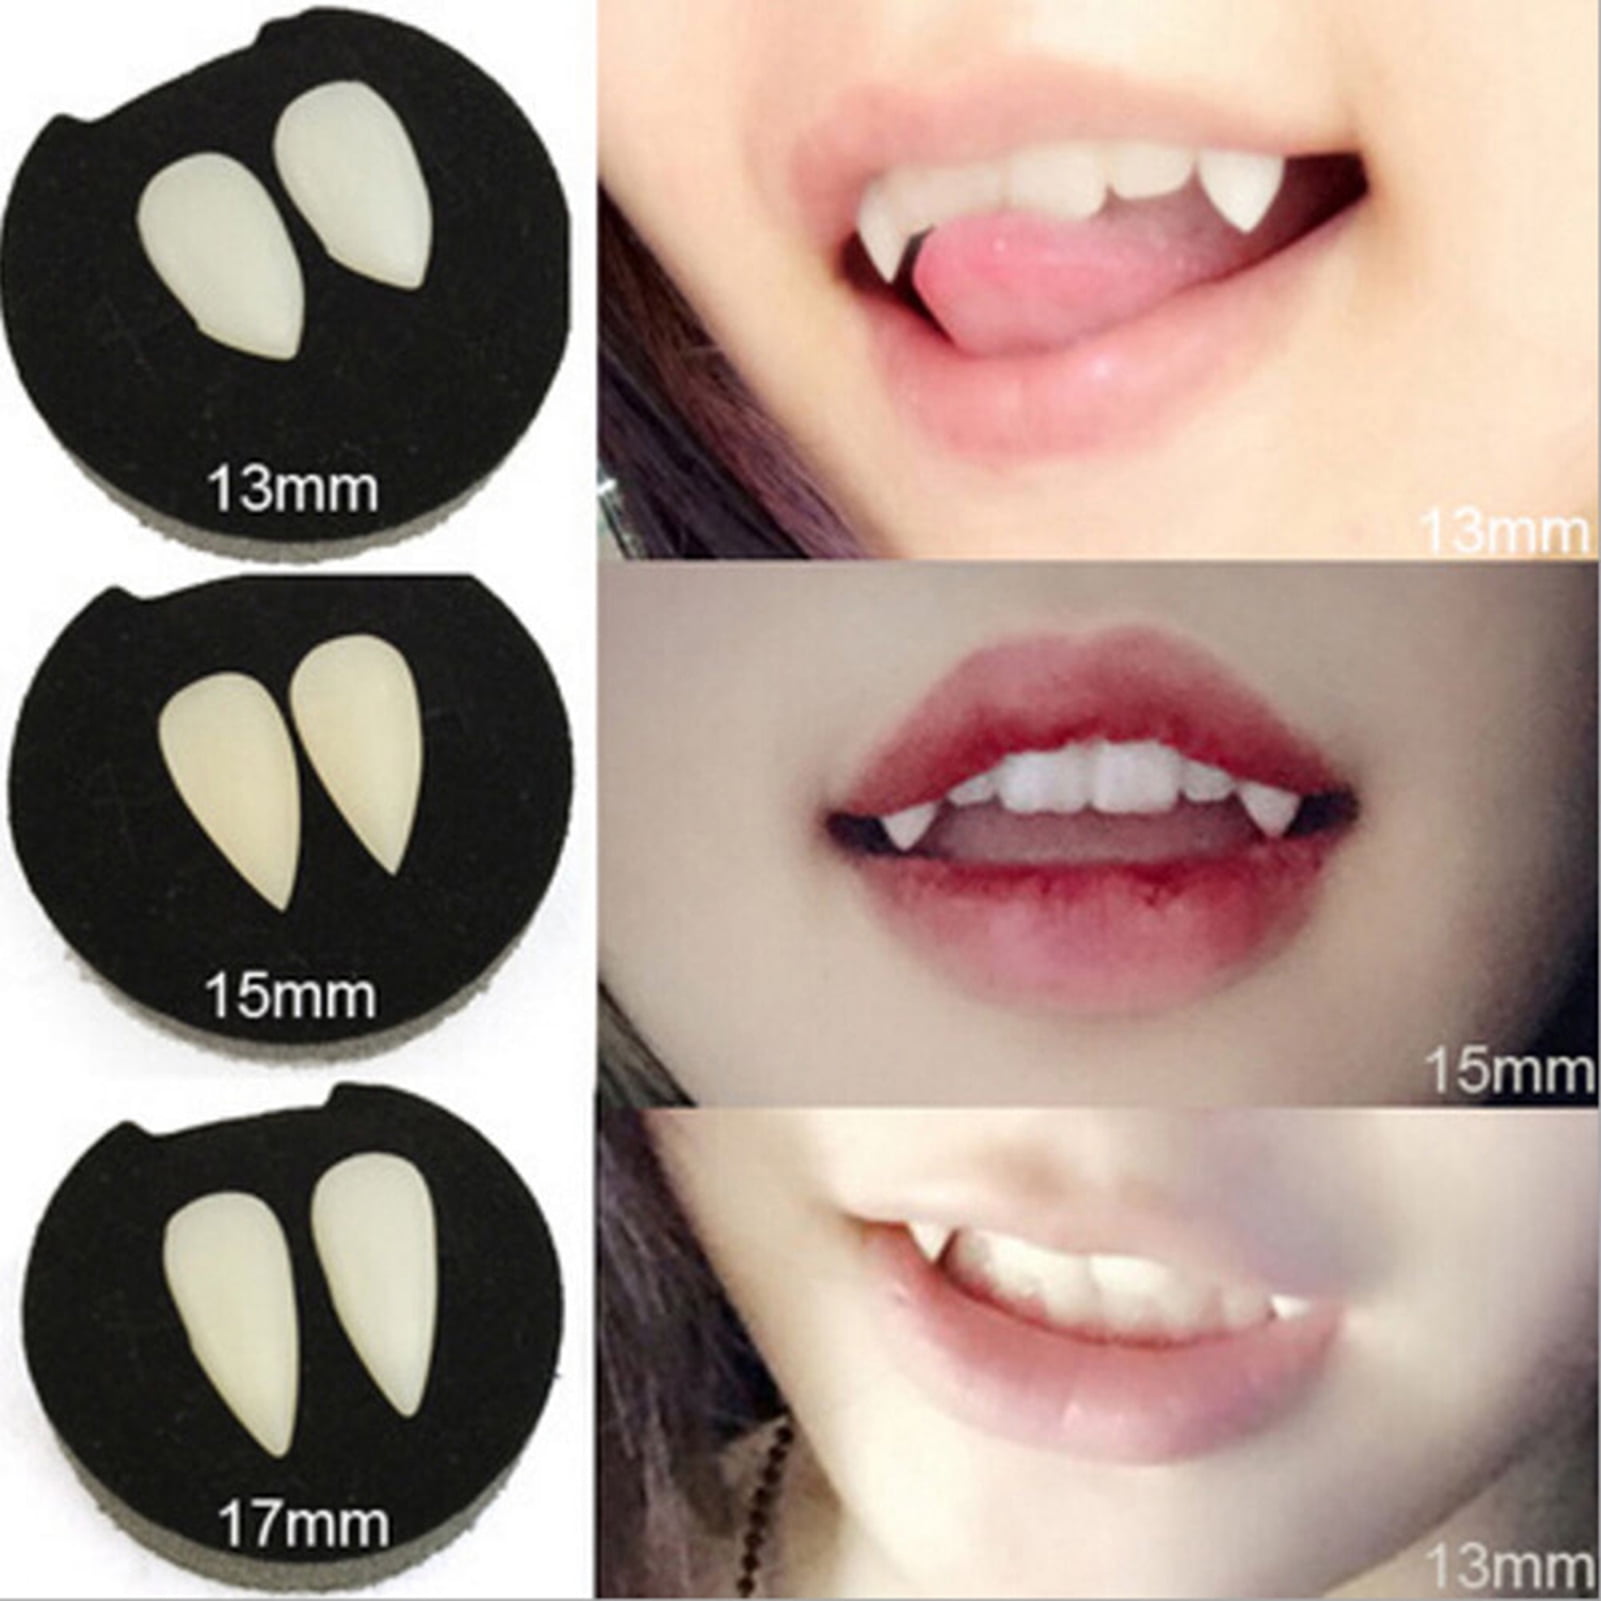  xutengy 4 Pieces Vampire Teeth Fangs with Vampire